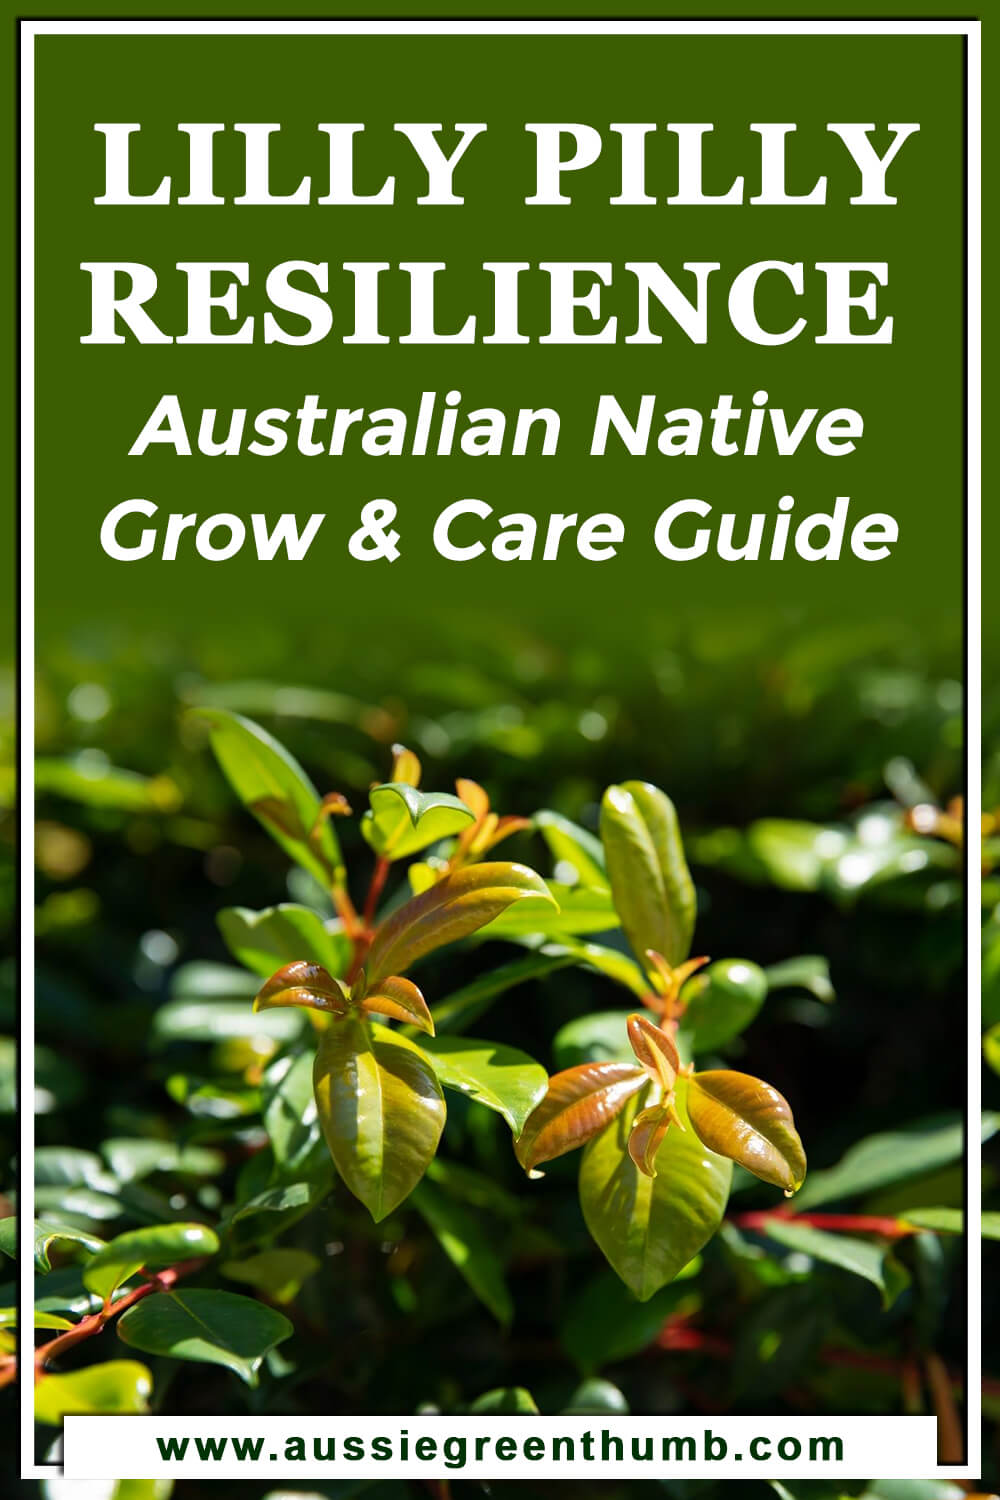 Lilly Pilly Resilience Australian Native Grow & Care Guide